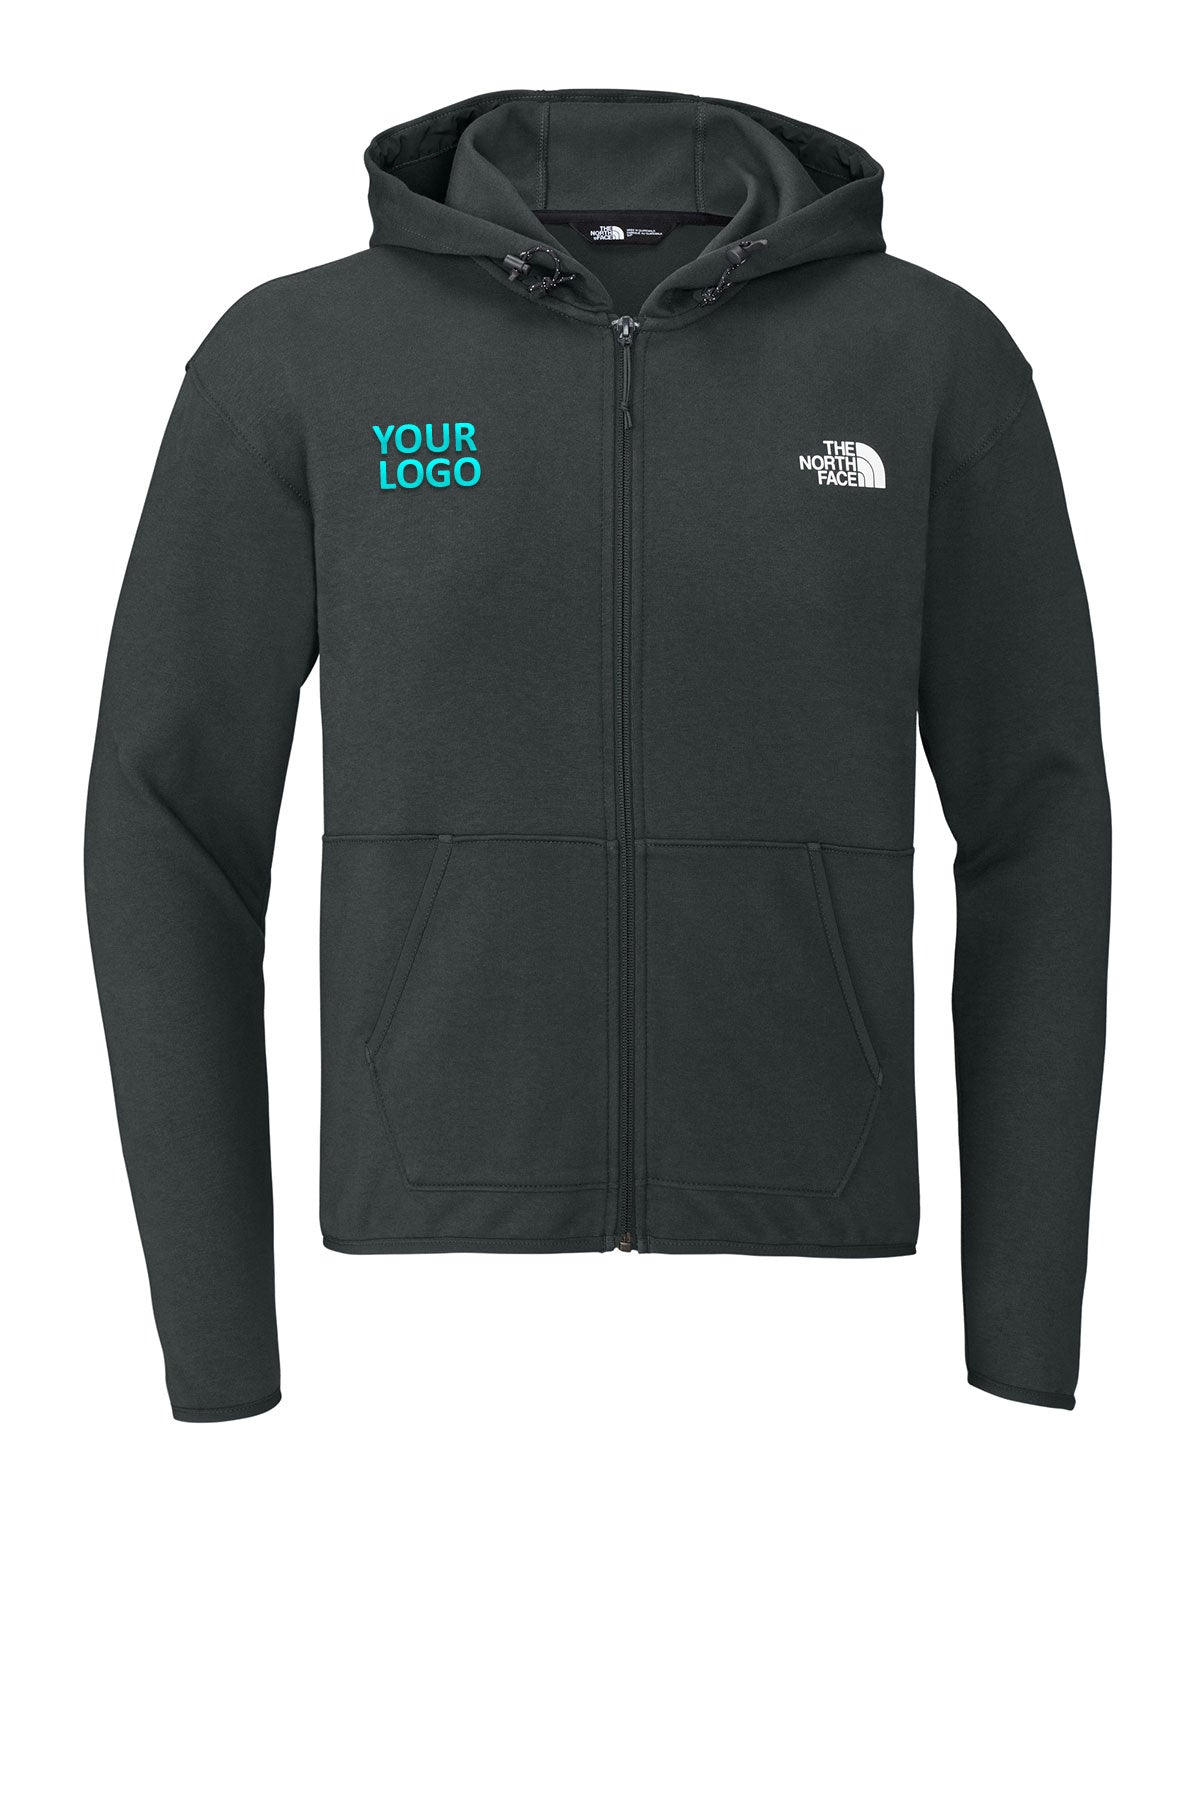 The North Face Asphalt Grey NF0A8BUS custom embroidered sweatshirts